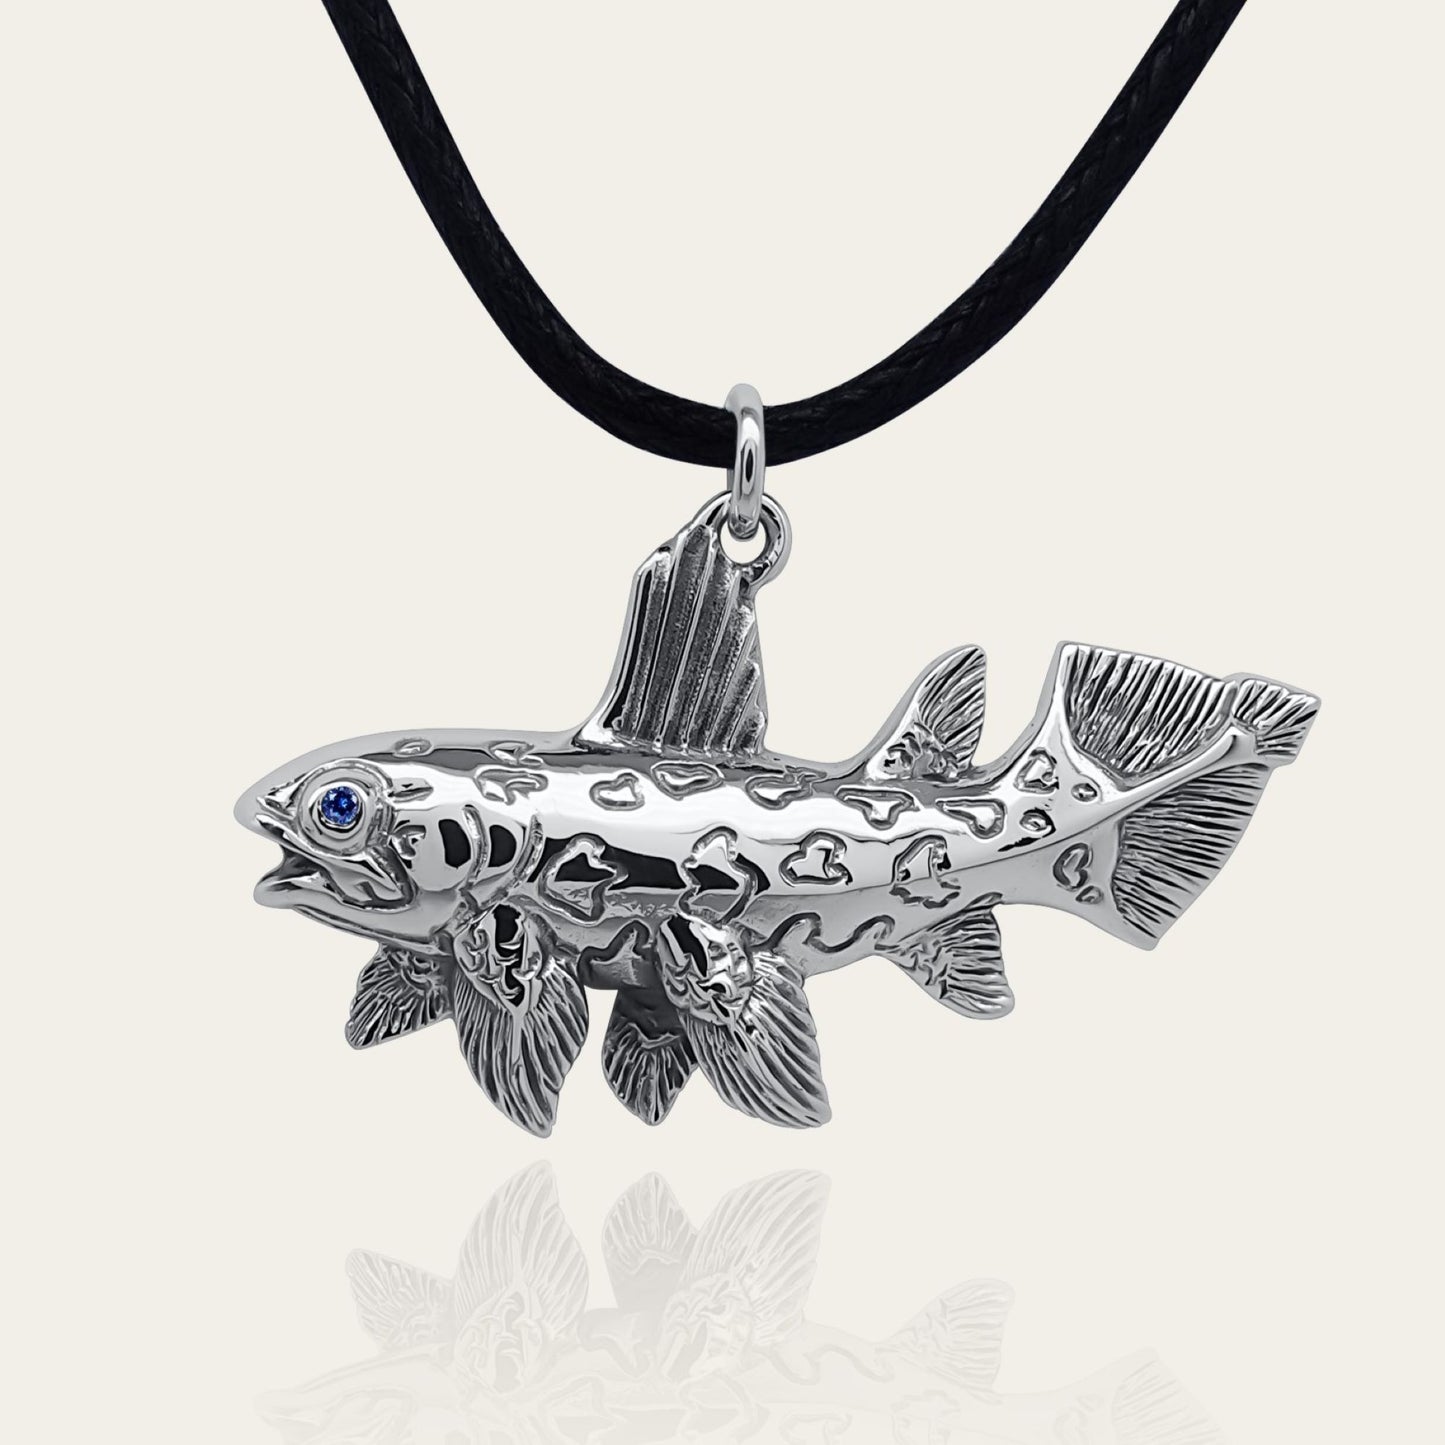 Coelacanth necklace. Made from sterling silver with an antiqued finish, set with a gemstone eye. Prehistoric fish pendant © Adrian Ashley